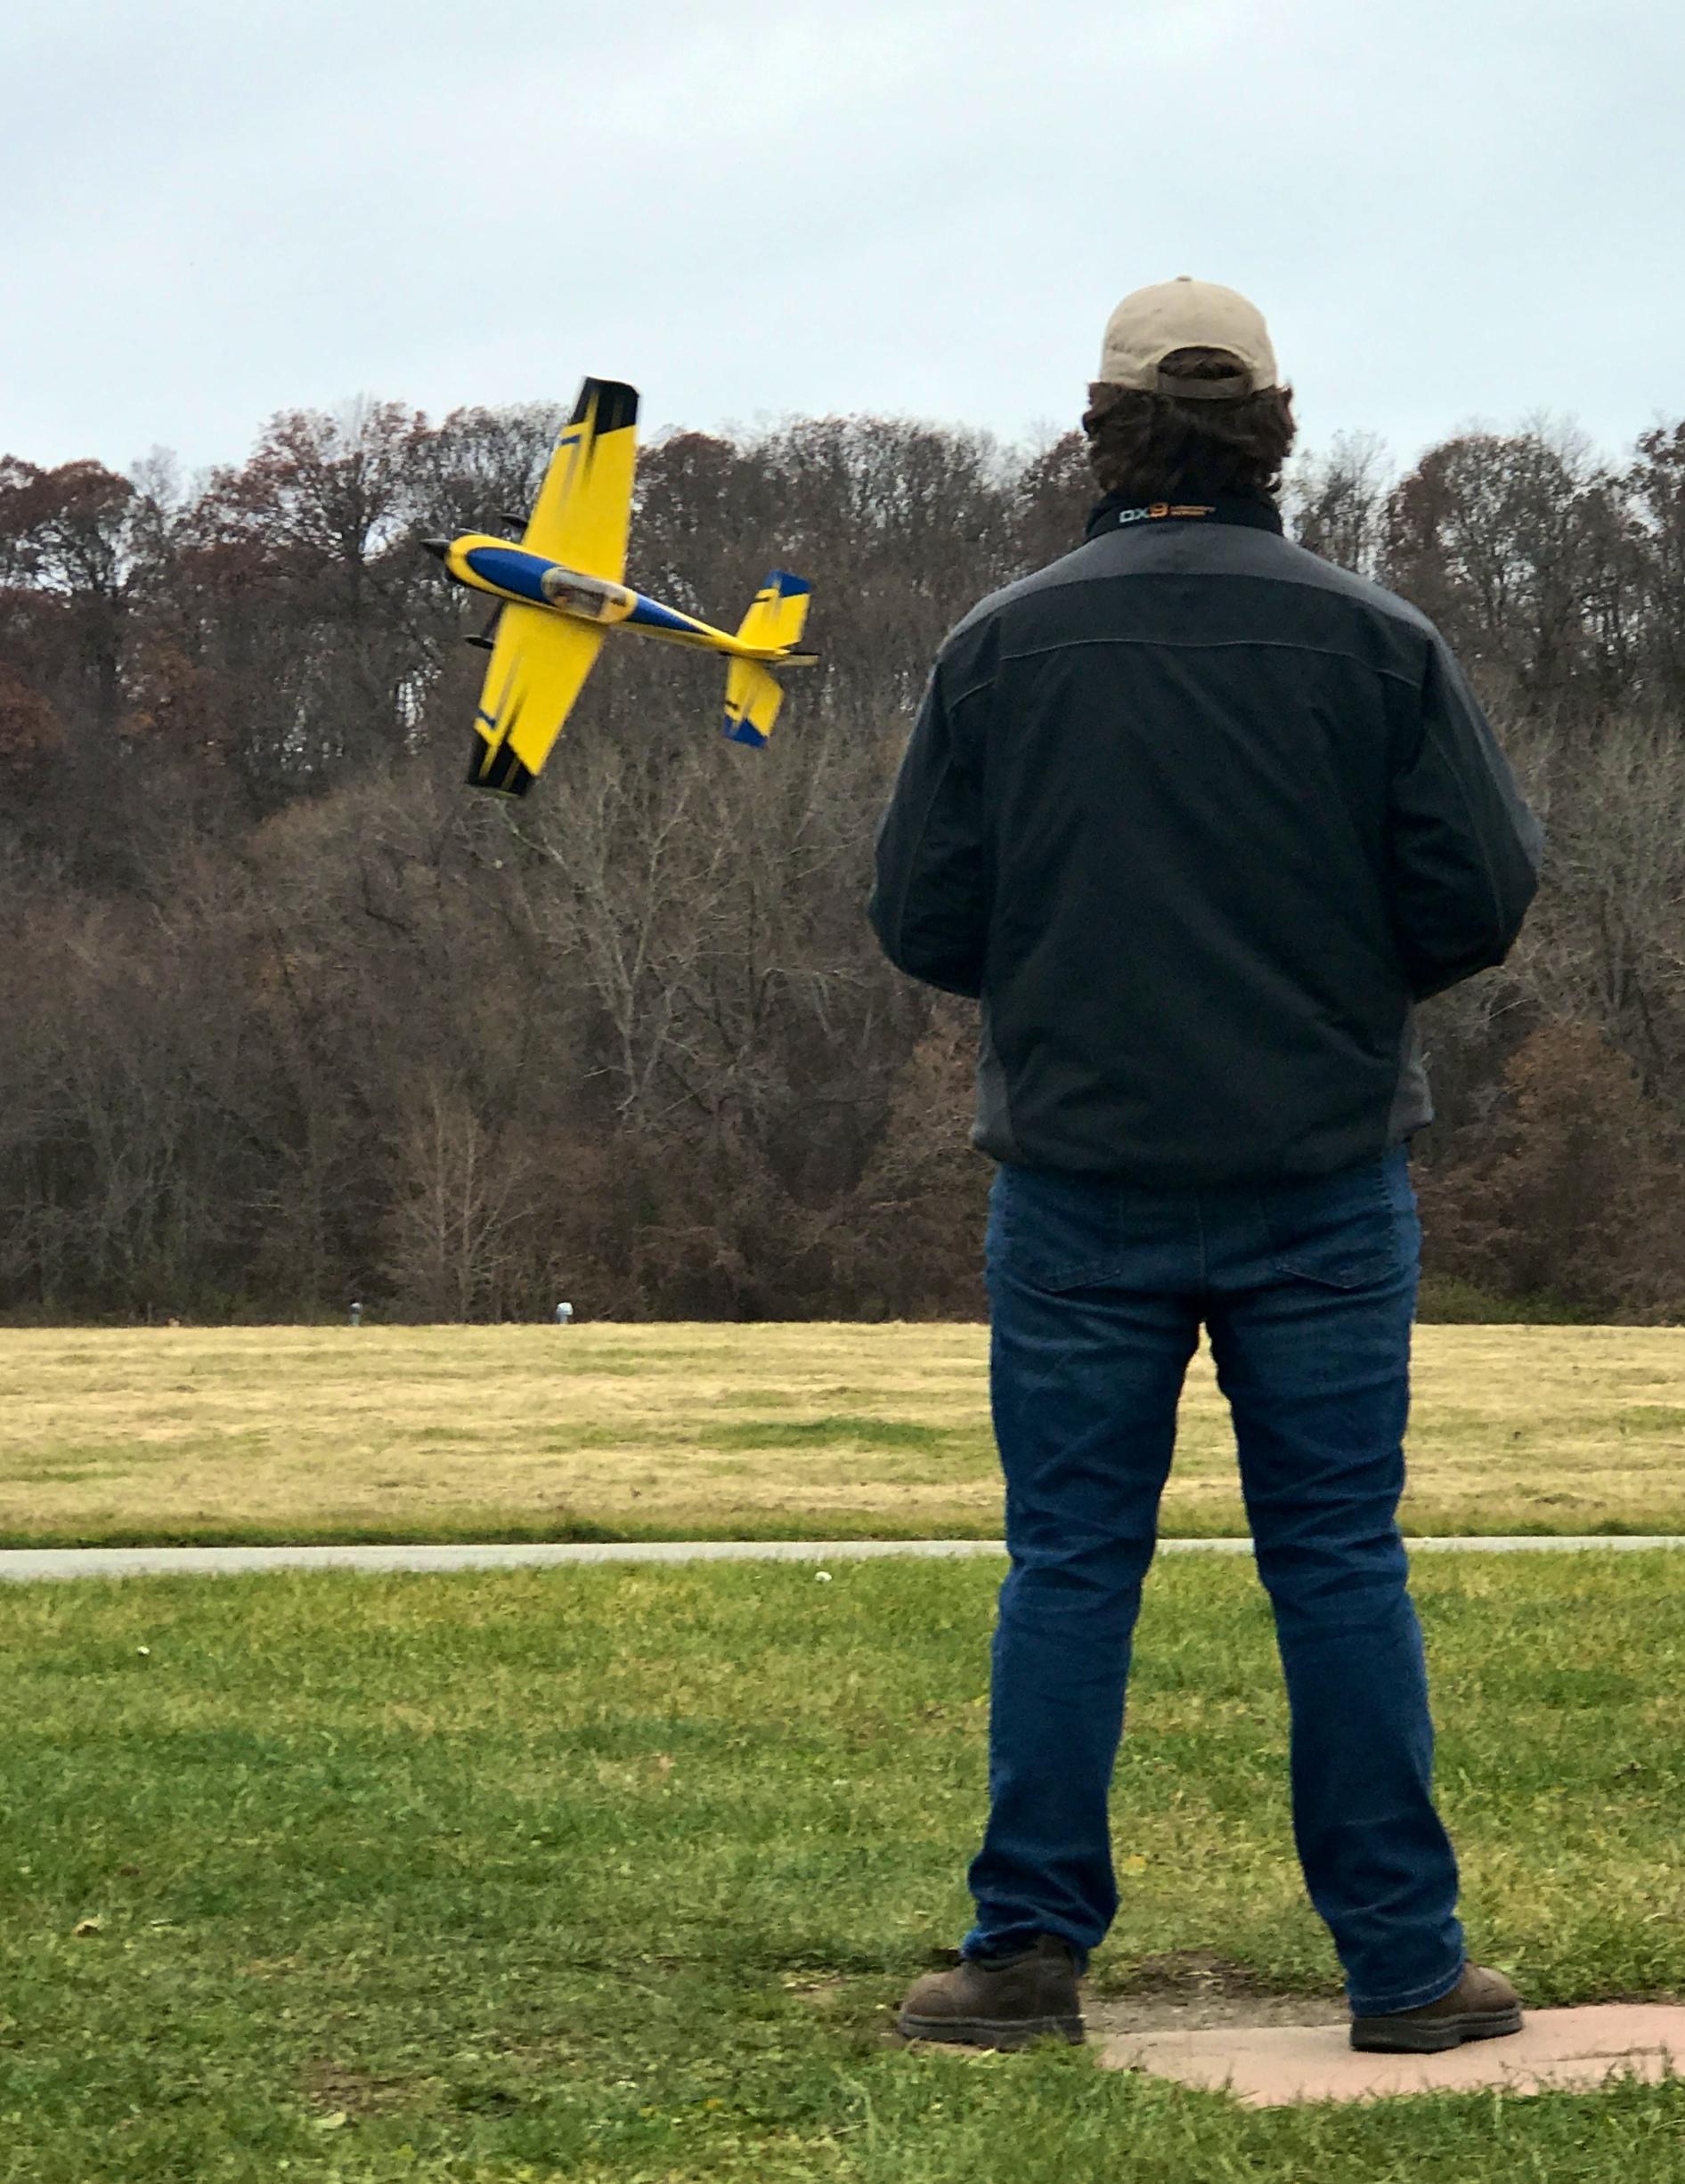 Flying Plane With Remote Control: Types and Sizes of Remote-Controlled Flying Planes